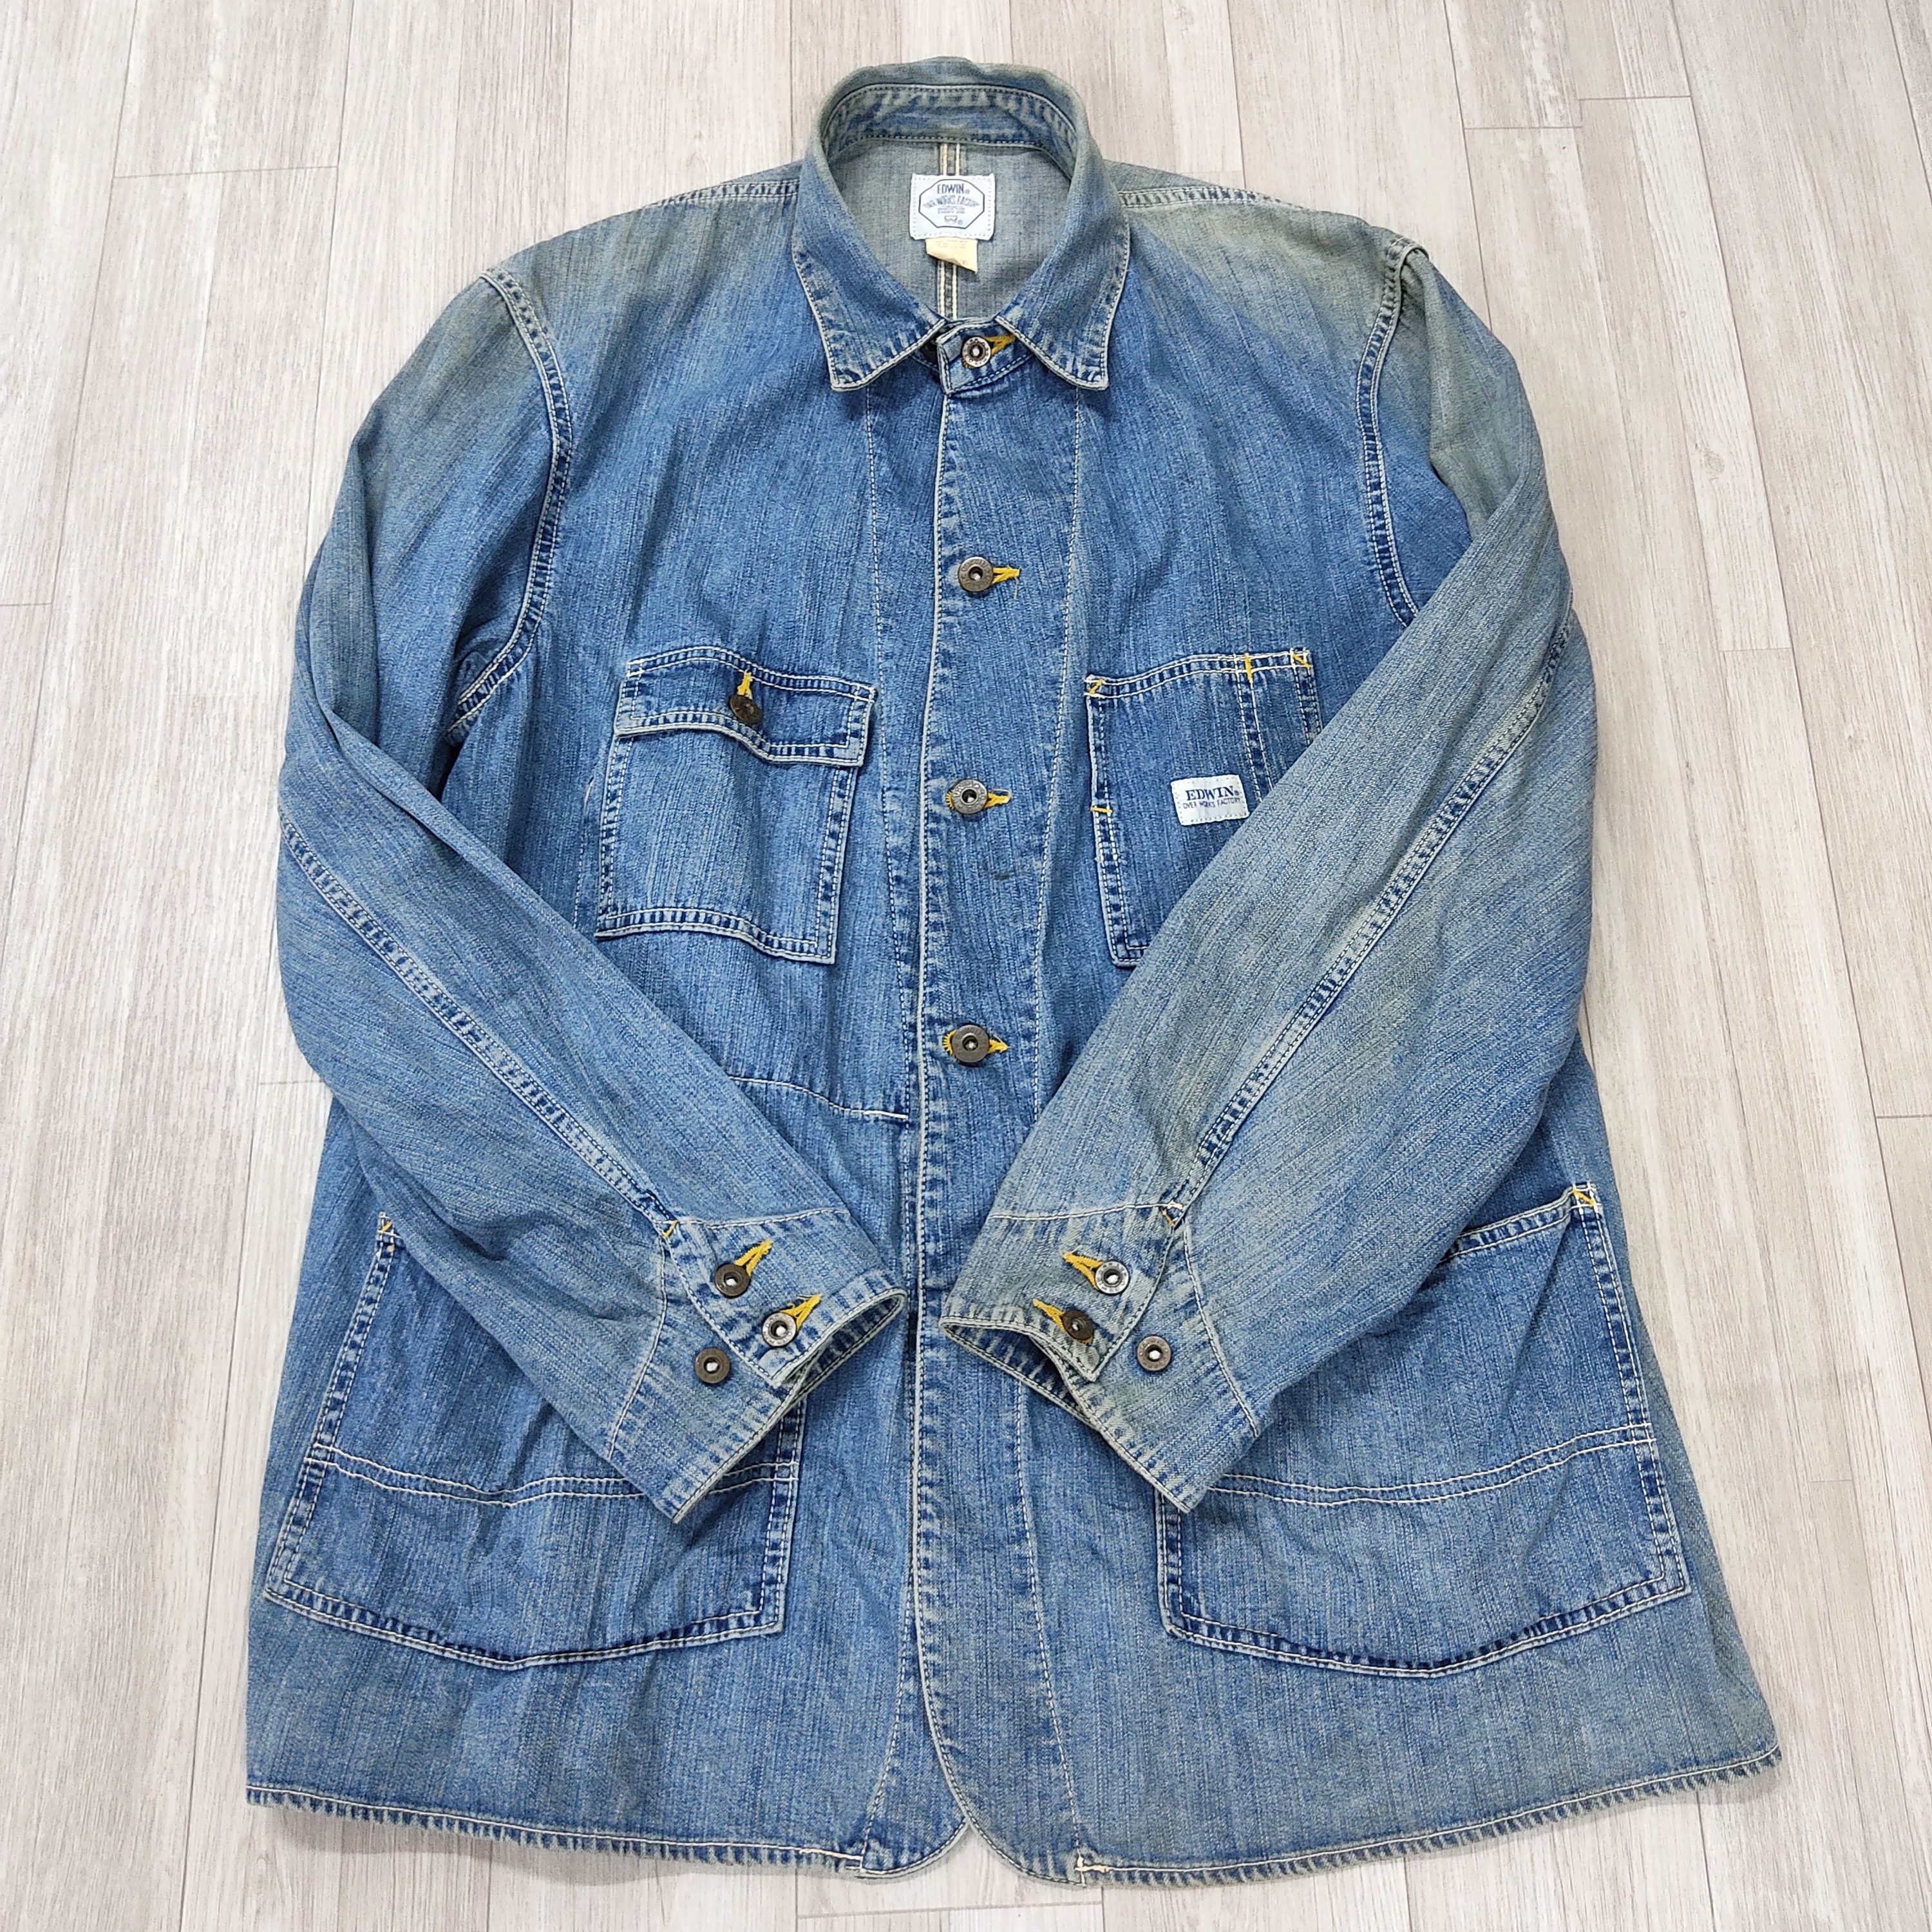 Vintage EDWIN Over Works Factory Chore Jacket - 5